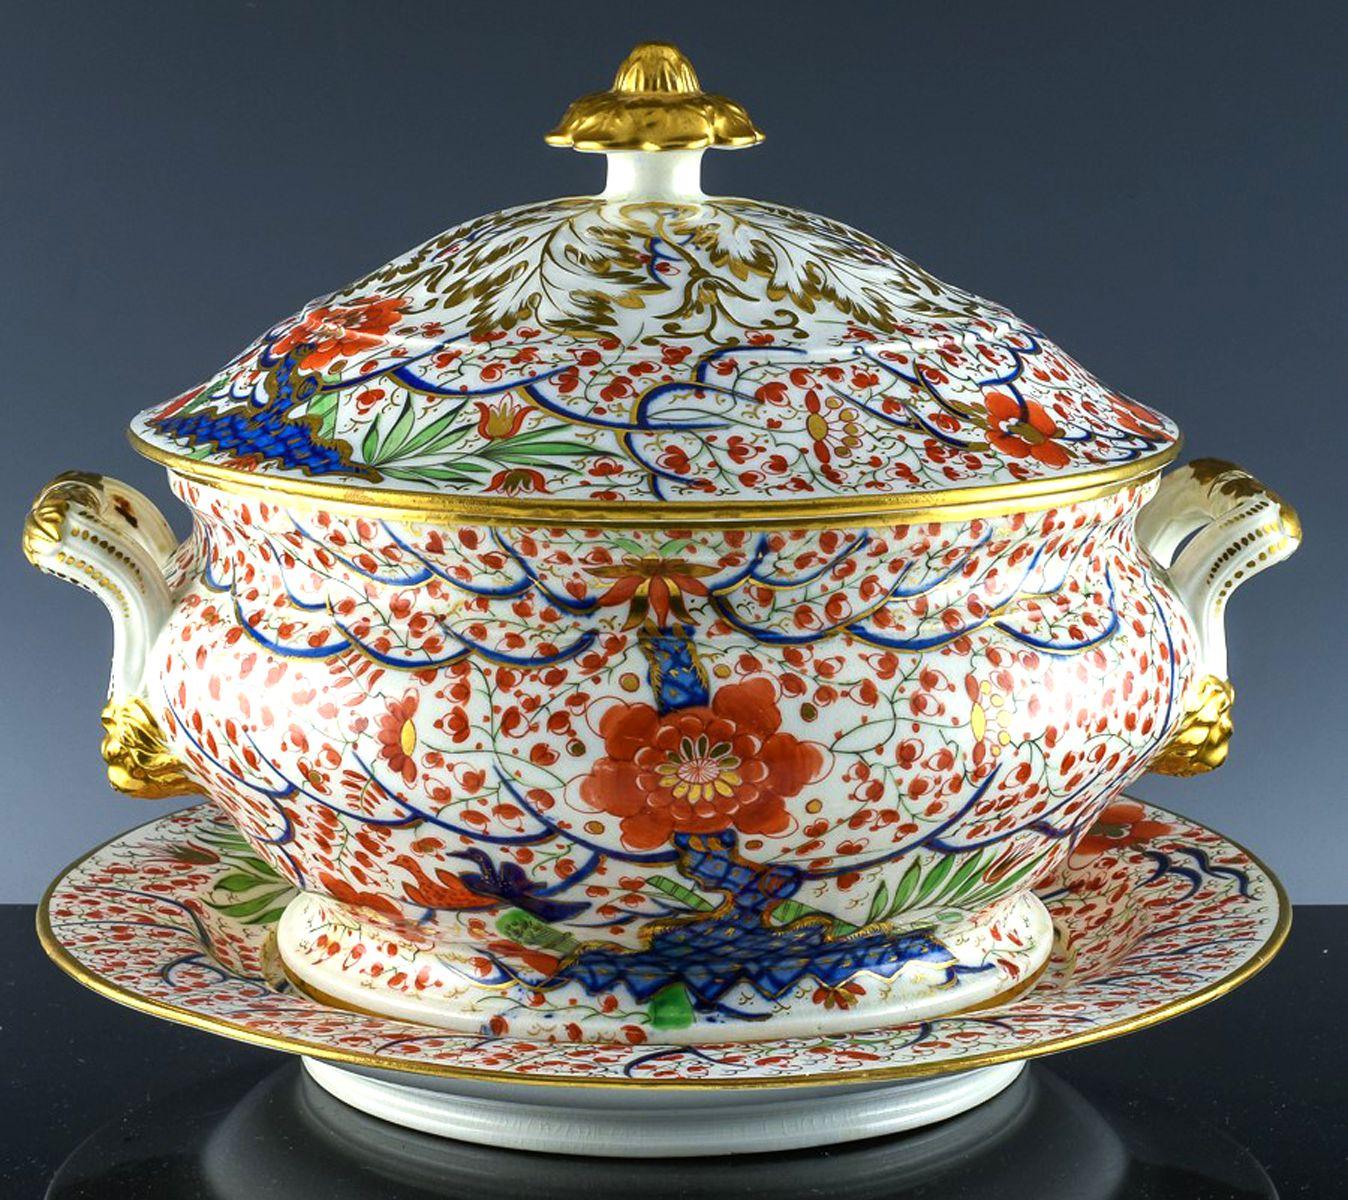 Regency Period Chamberlain Worcester Porcelain Soup Tureen, Cover and Stand For Sale 2